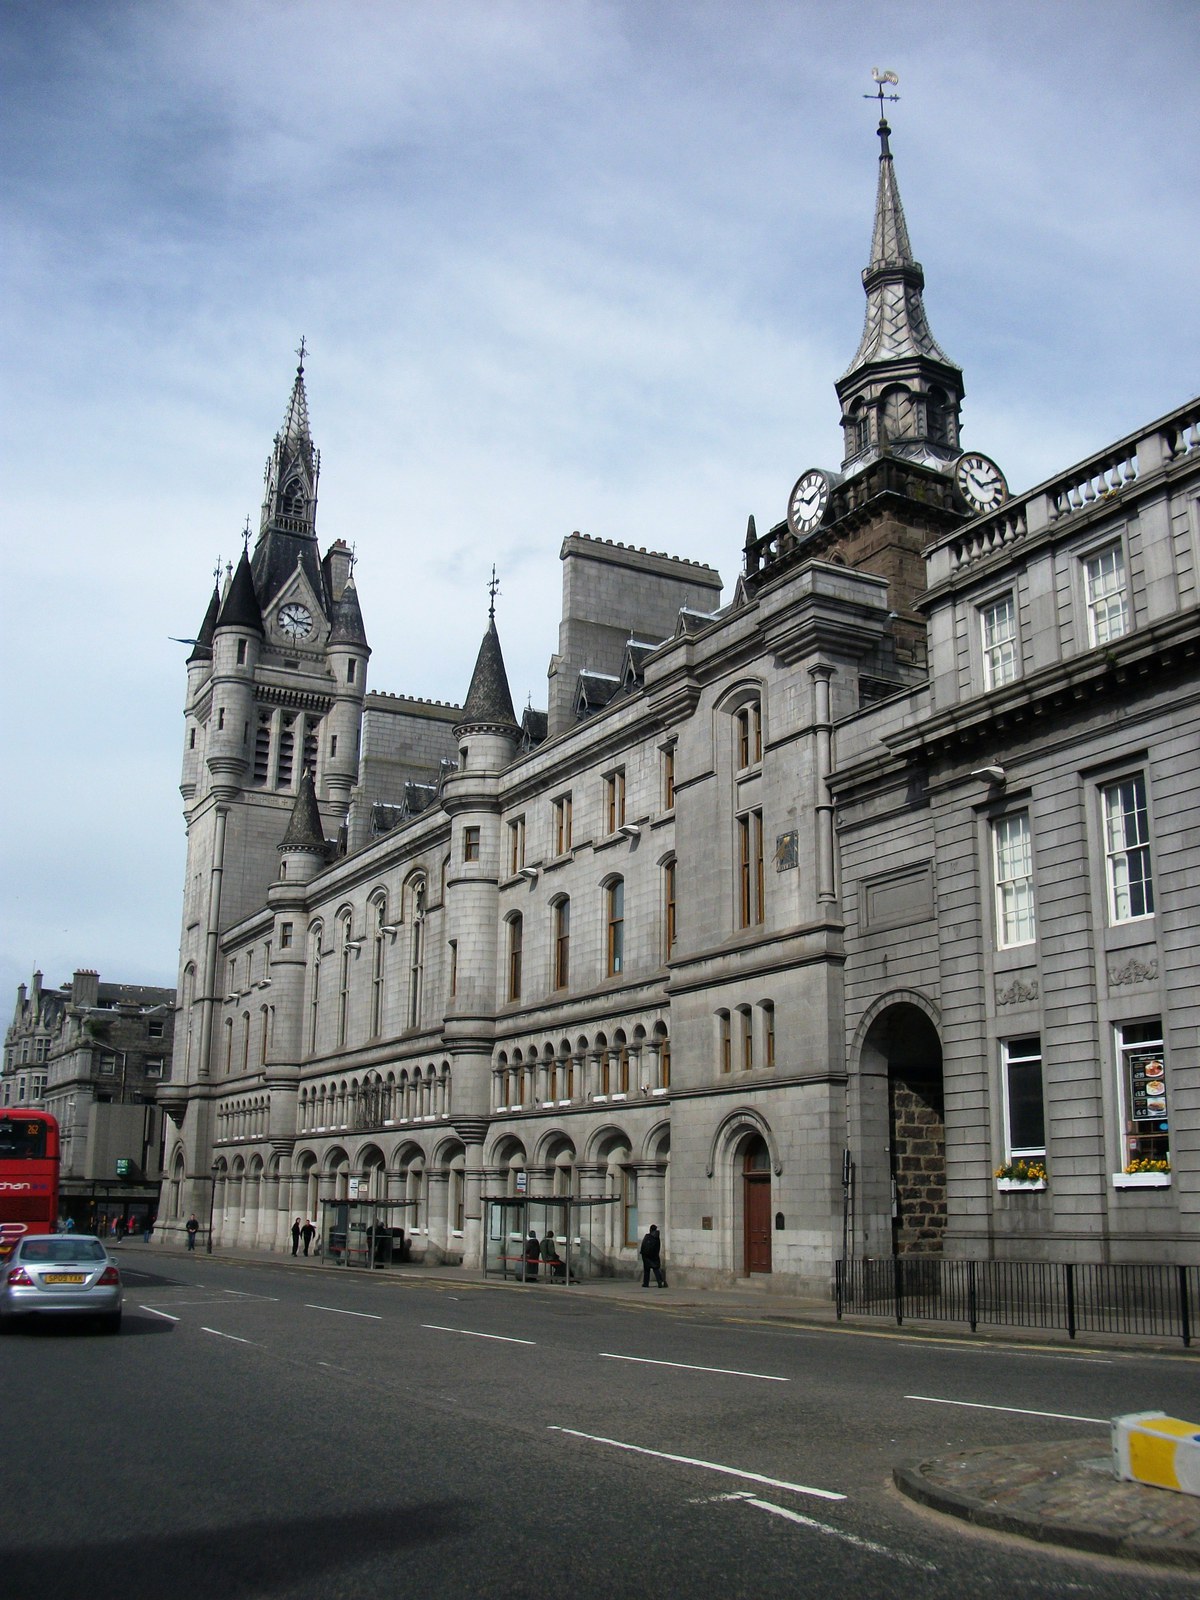 Photograph of Aberdeen Sheriff Court and Justice of the Peace Court building